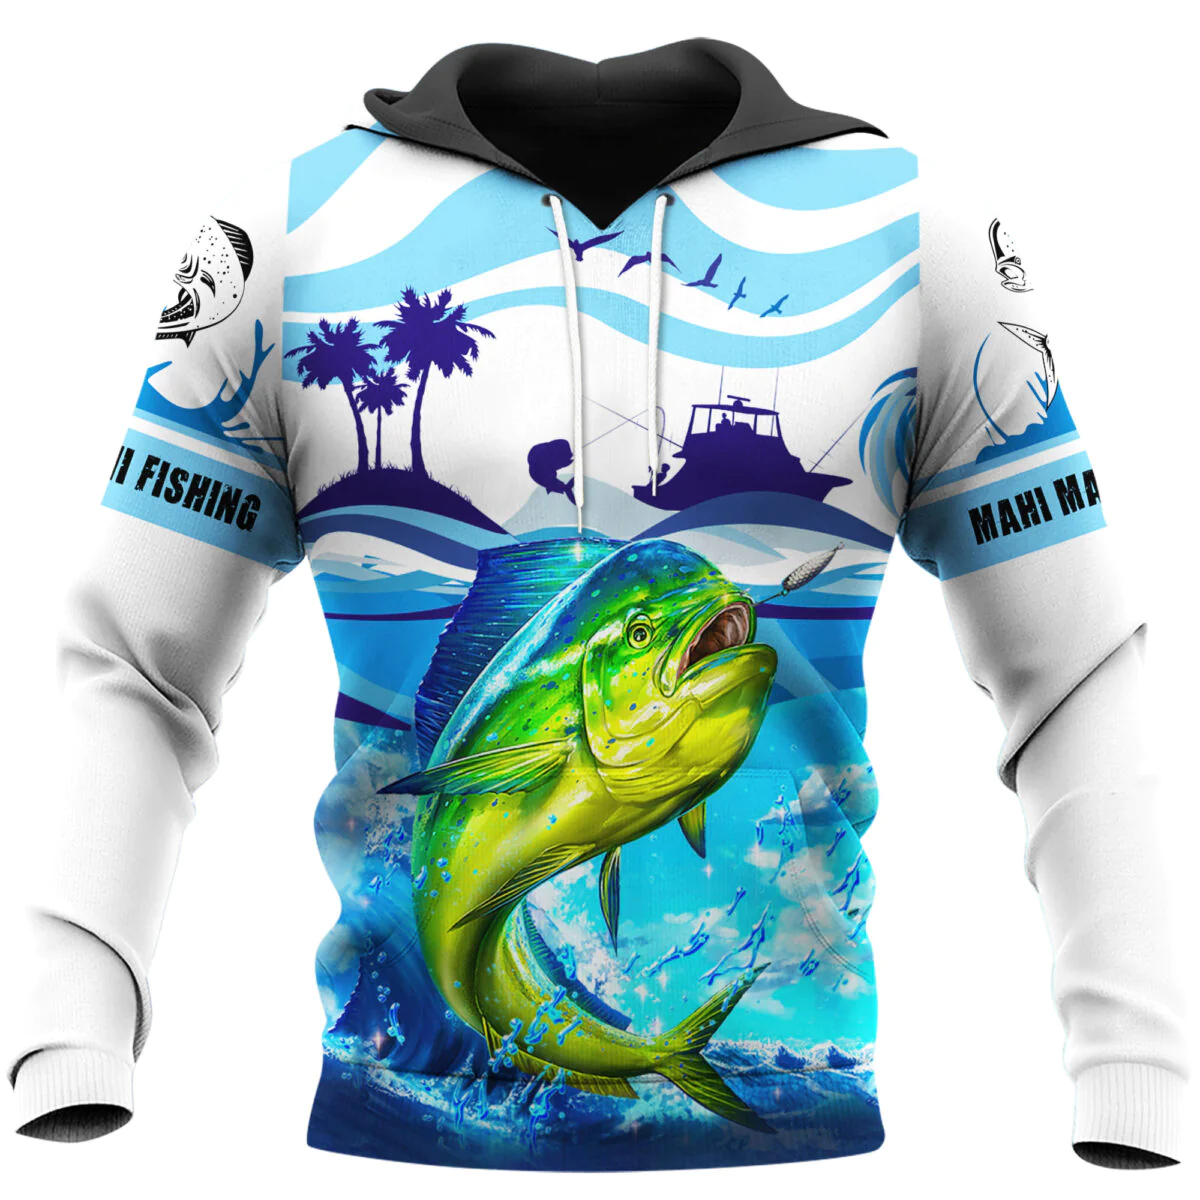 White, green and blue fishing hoodie. Dolphin fish, boat, waves and palm tree design.